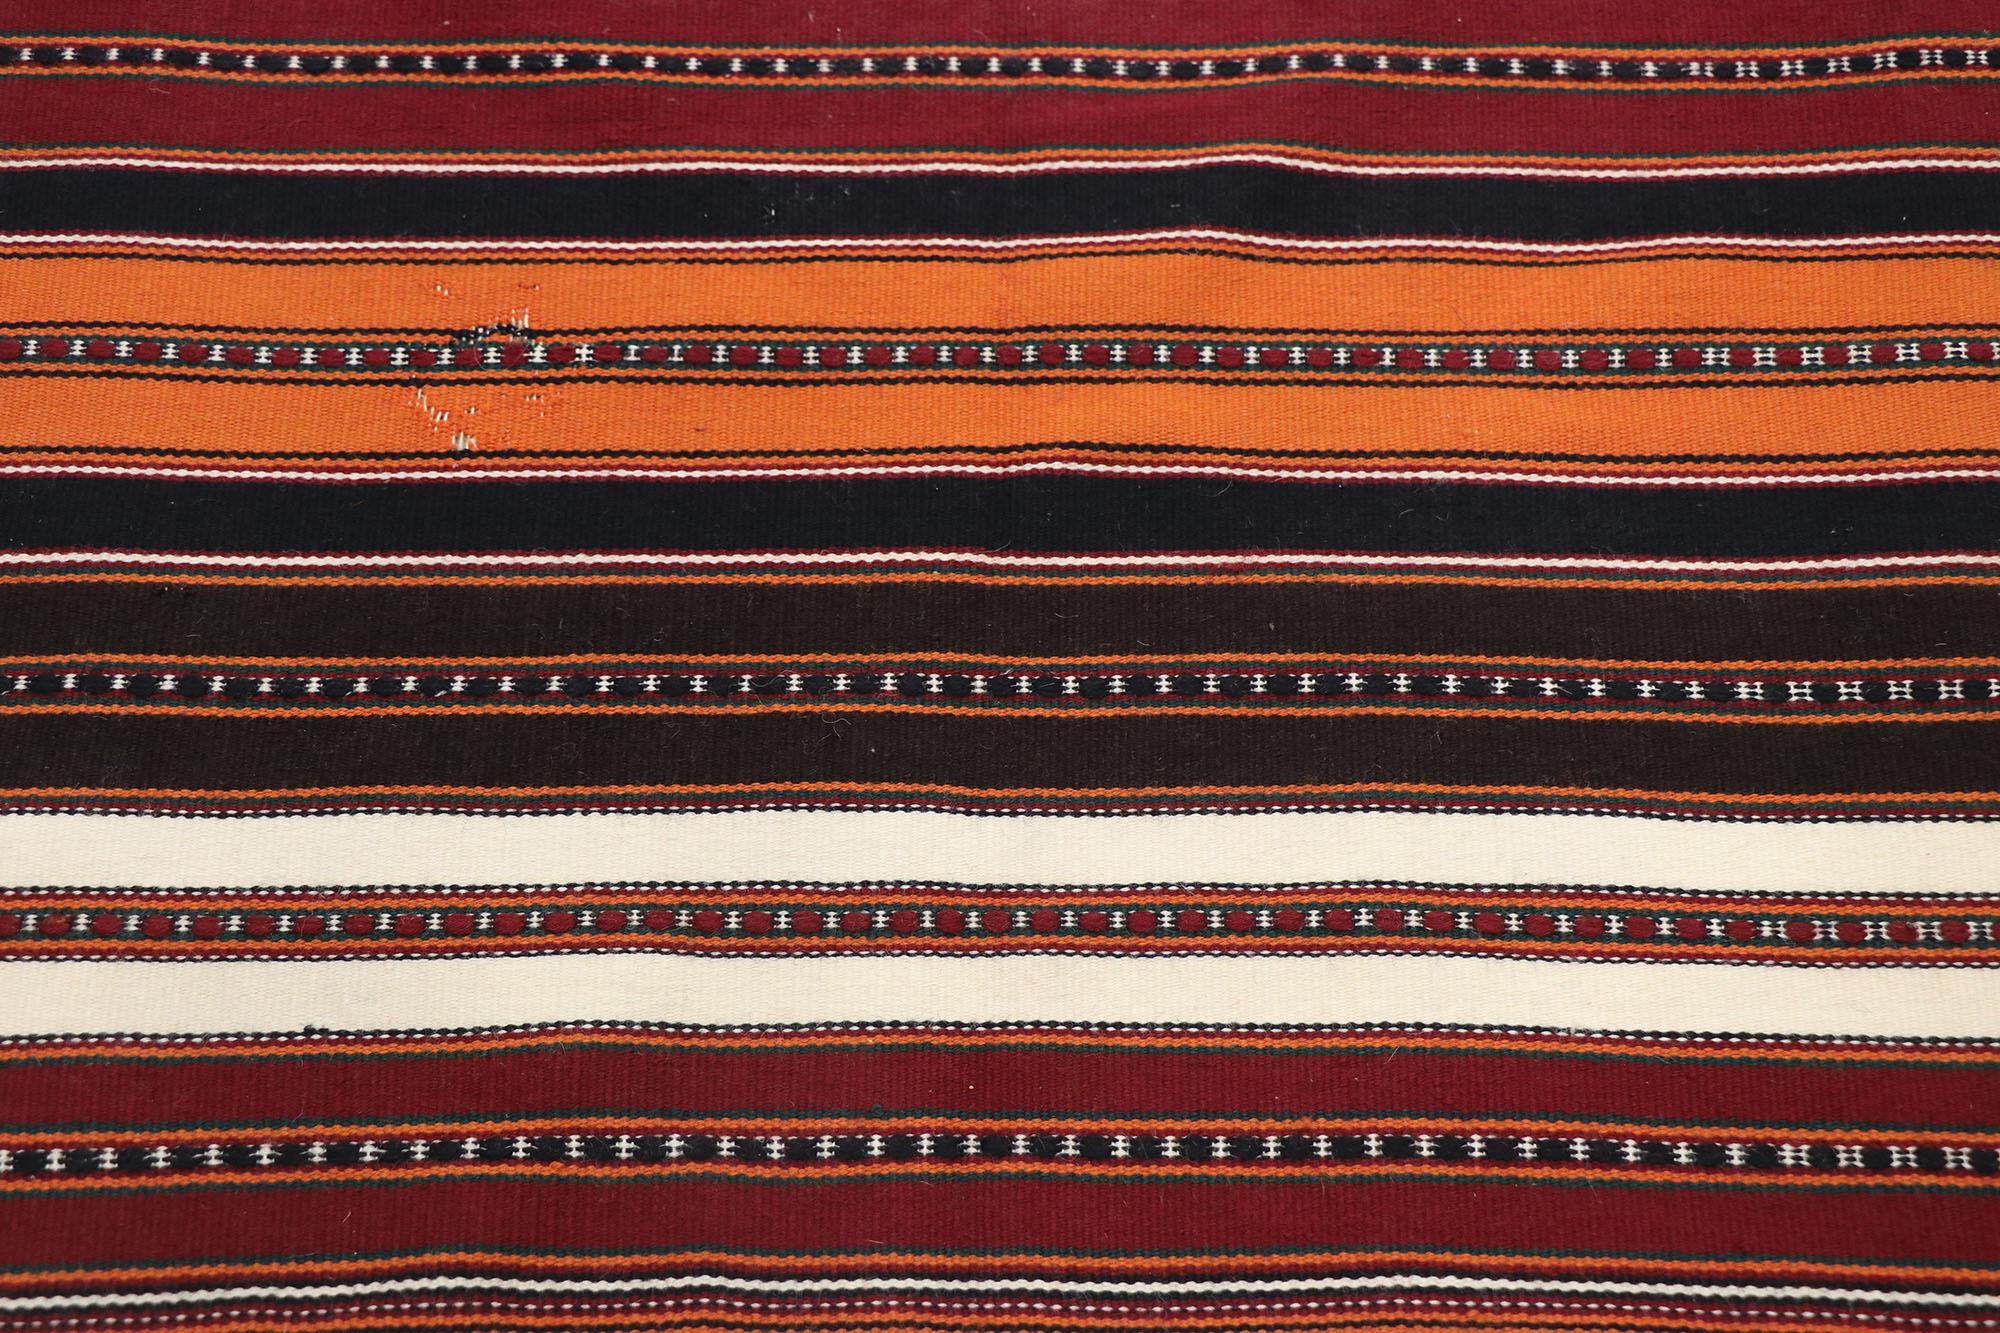 Vintage Persian Shiraz Striped Kilim Rug, Pacific Northwest Meets Luxury Lodge In Good Condition For Sale In Dallas, TX